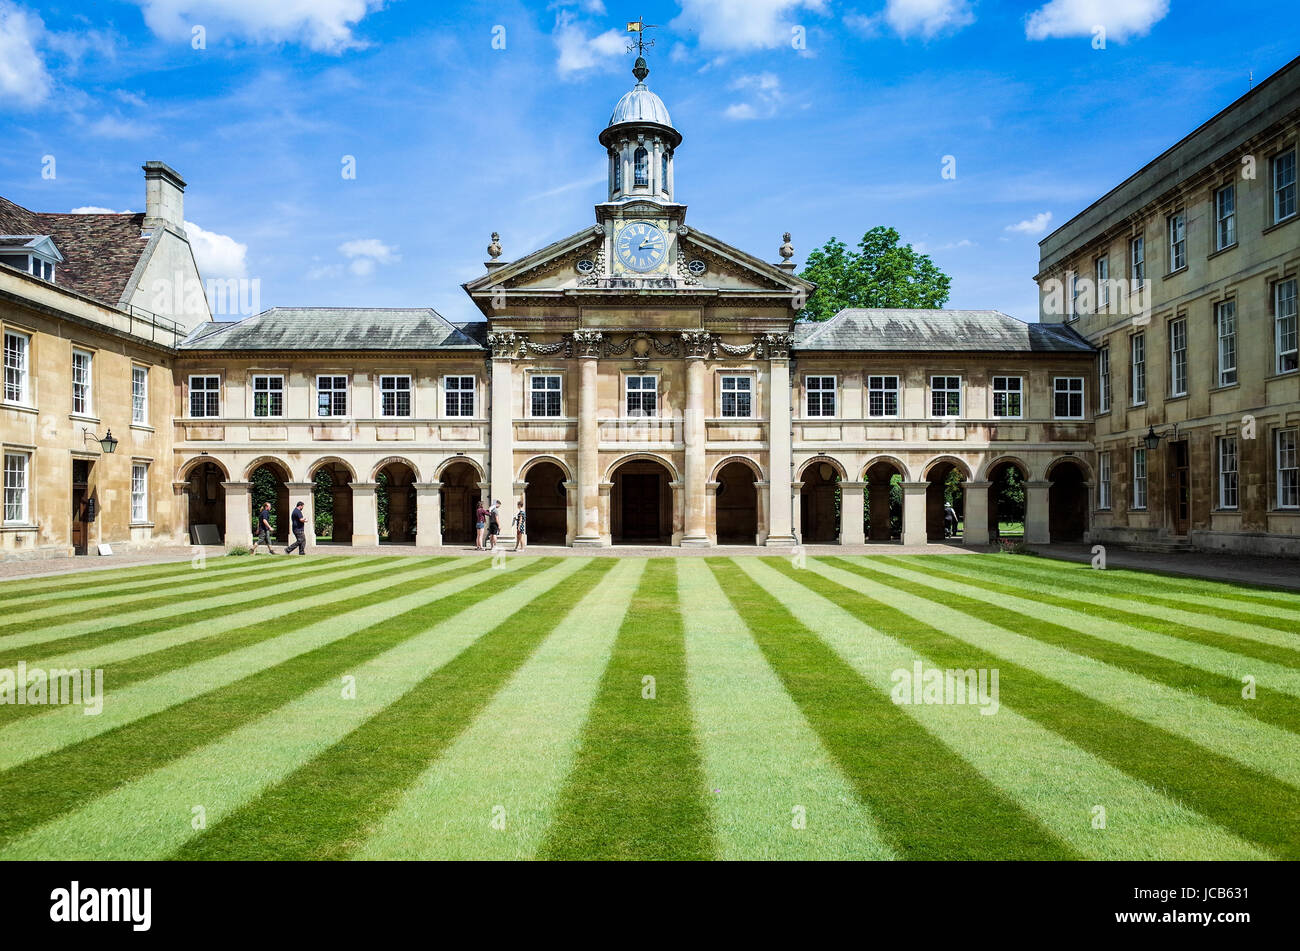 Emmanuel College Cambridge - The Clocktower and Front Court at Emmanuel College, Cambridge University. Founded 1584. Architect: Sir Christopher Wren. Stock Photo